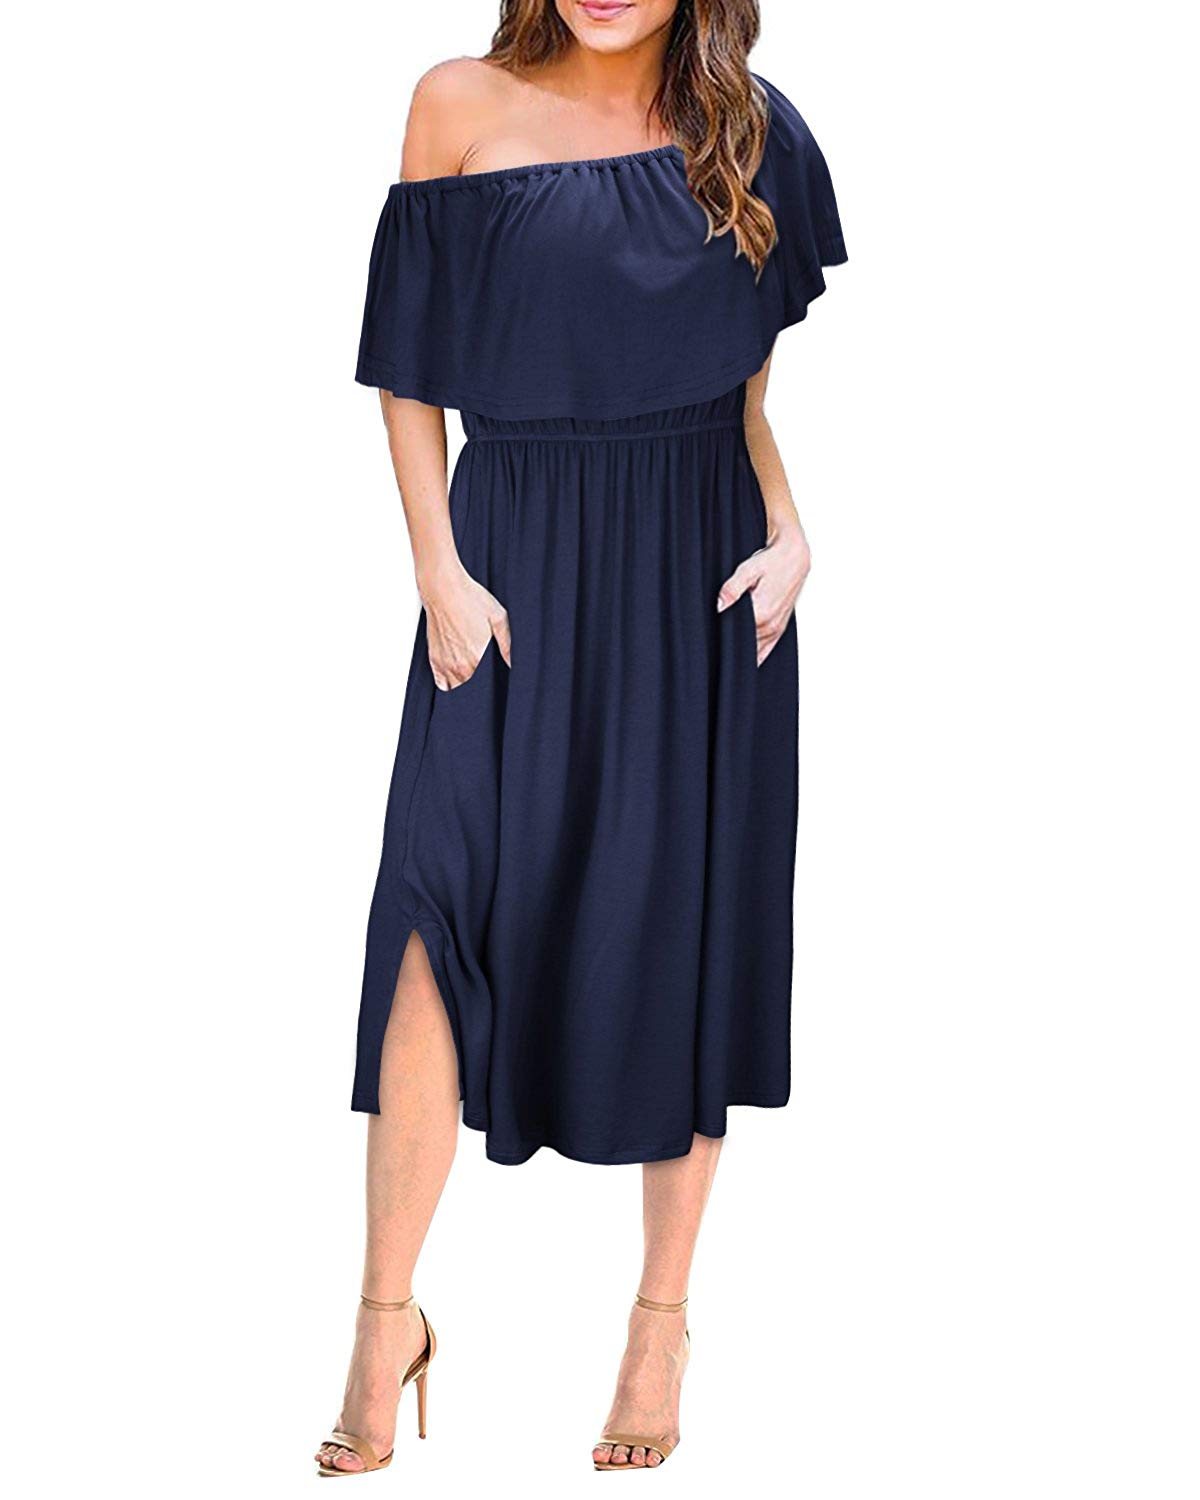 OUGES Womens Summer Ruffle Off Shoulder Casual Midi Dress Party, Navy ...